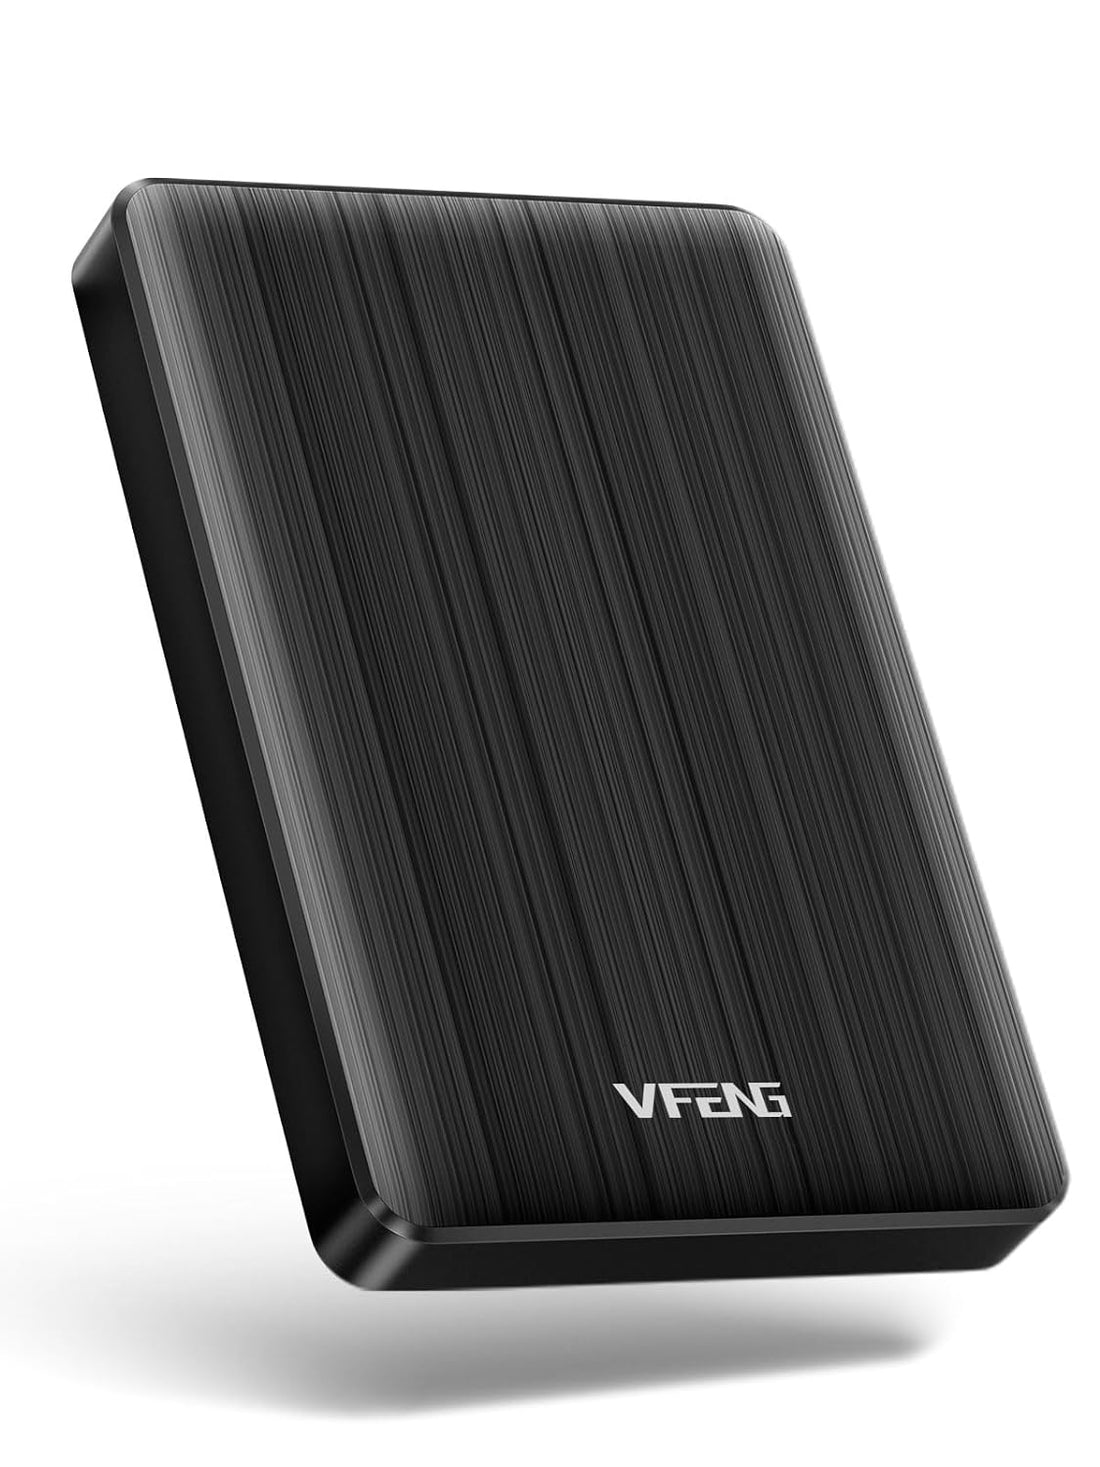 VFENG 320GB External Hard Drive, Portable Hard Drive USB 3.0 Compatible with Mac, Xbox, PS4, Xbox One, PC, Laptop, Ultra Slim HDD for Storage Expansion Backup Transmission, Black